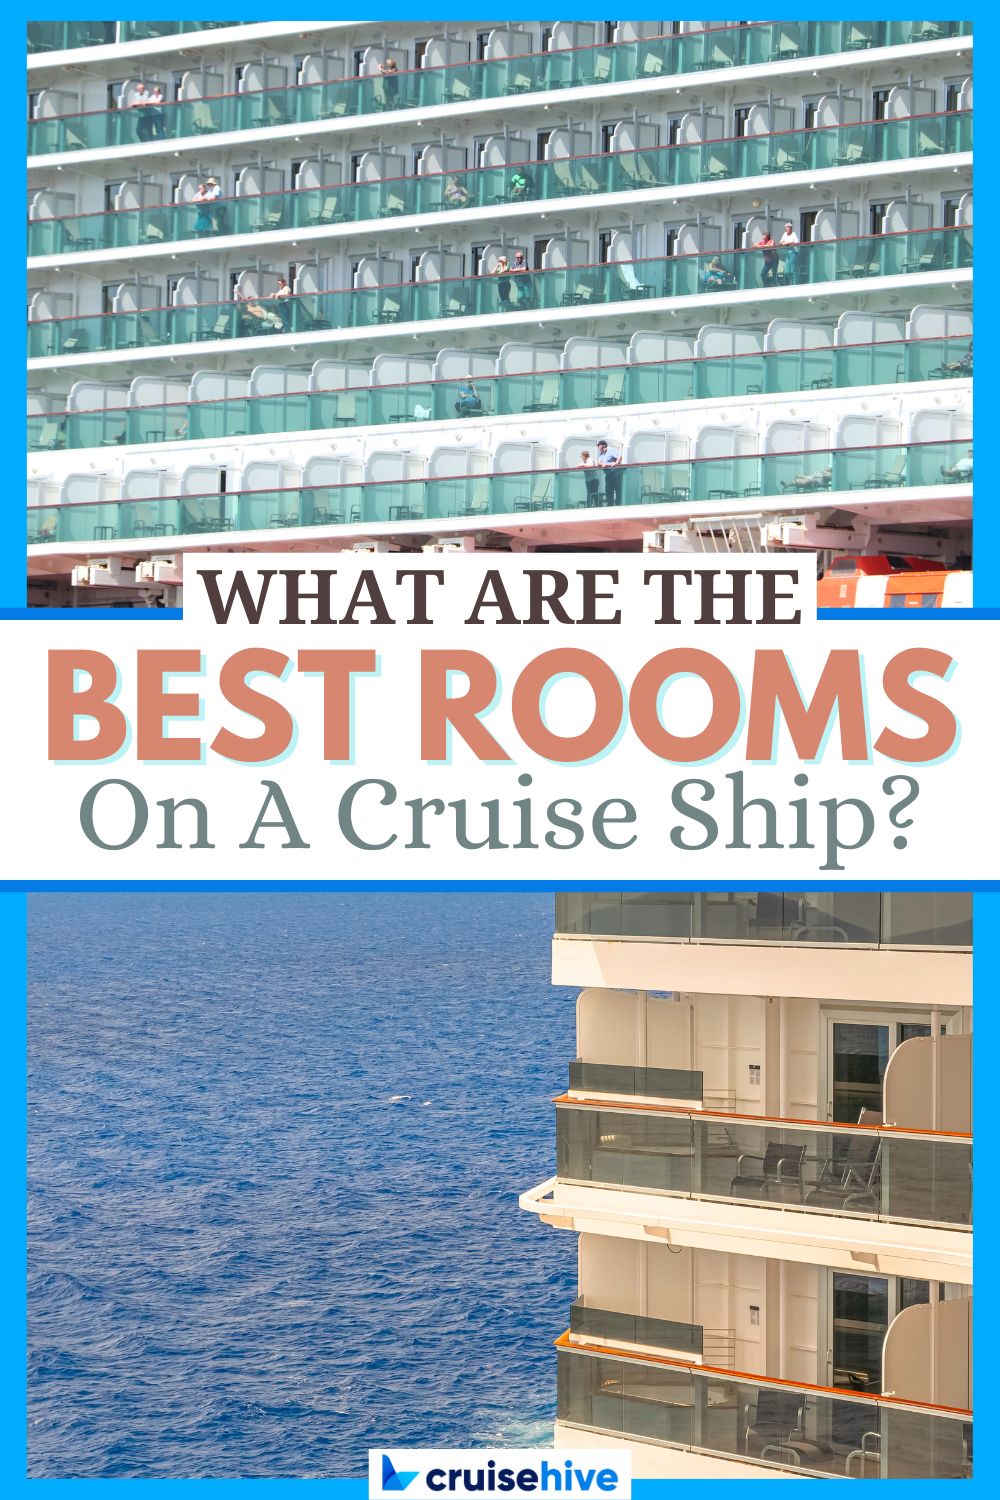 Best Rooms on a Cruise Ship